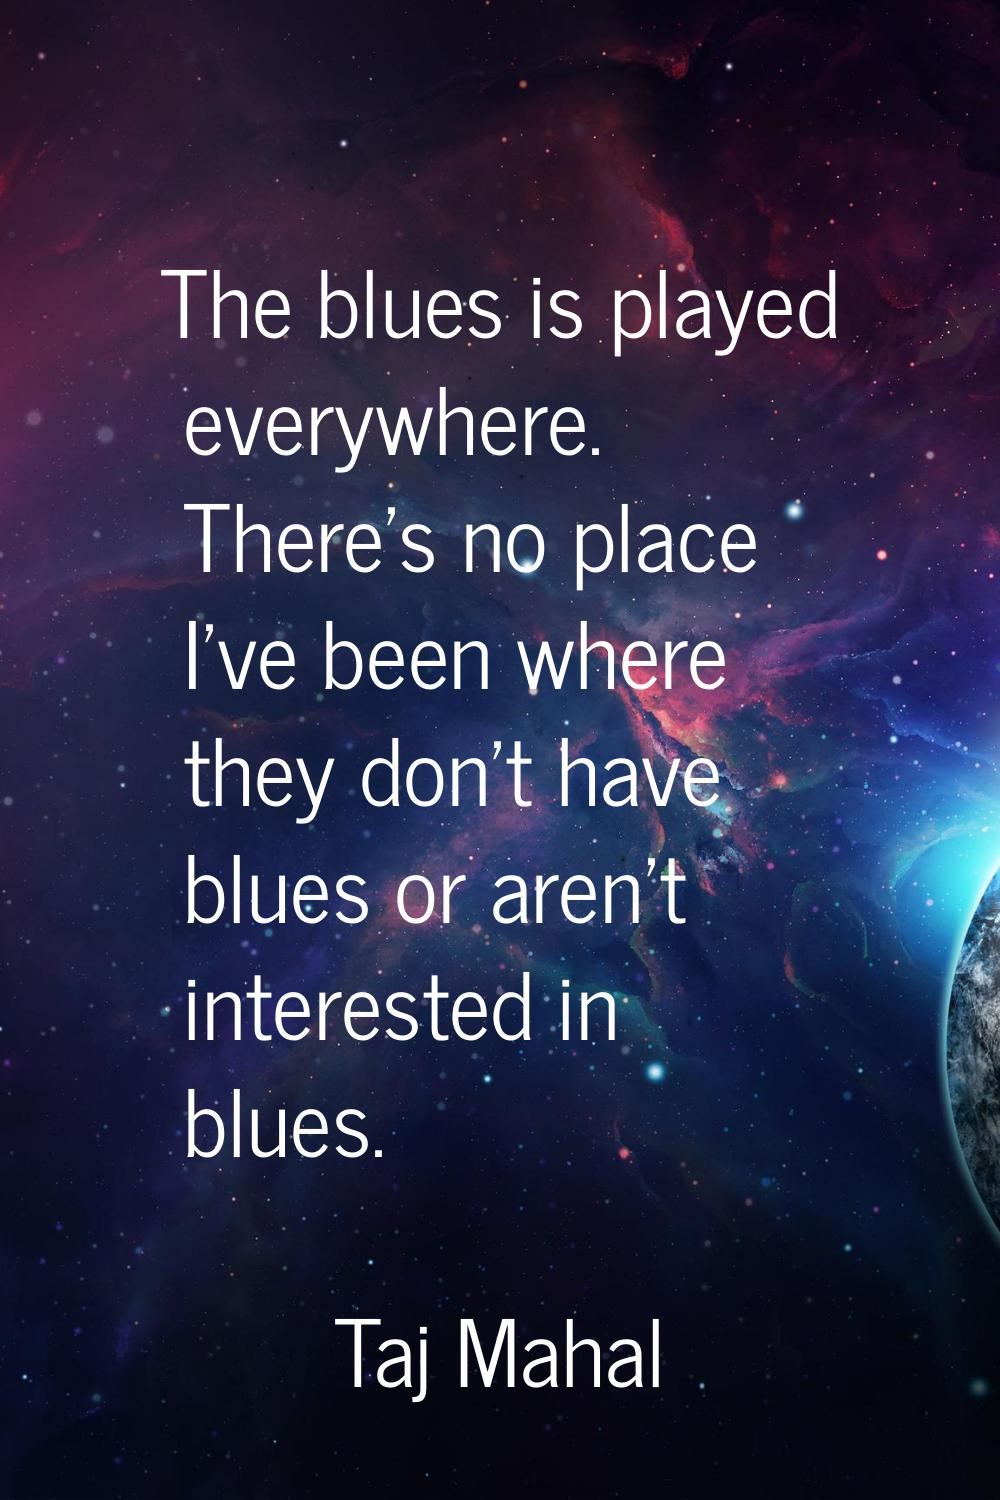 The blues is played everywhere. There's no place I've been where they don't have blues or aren't in